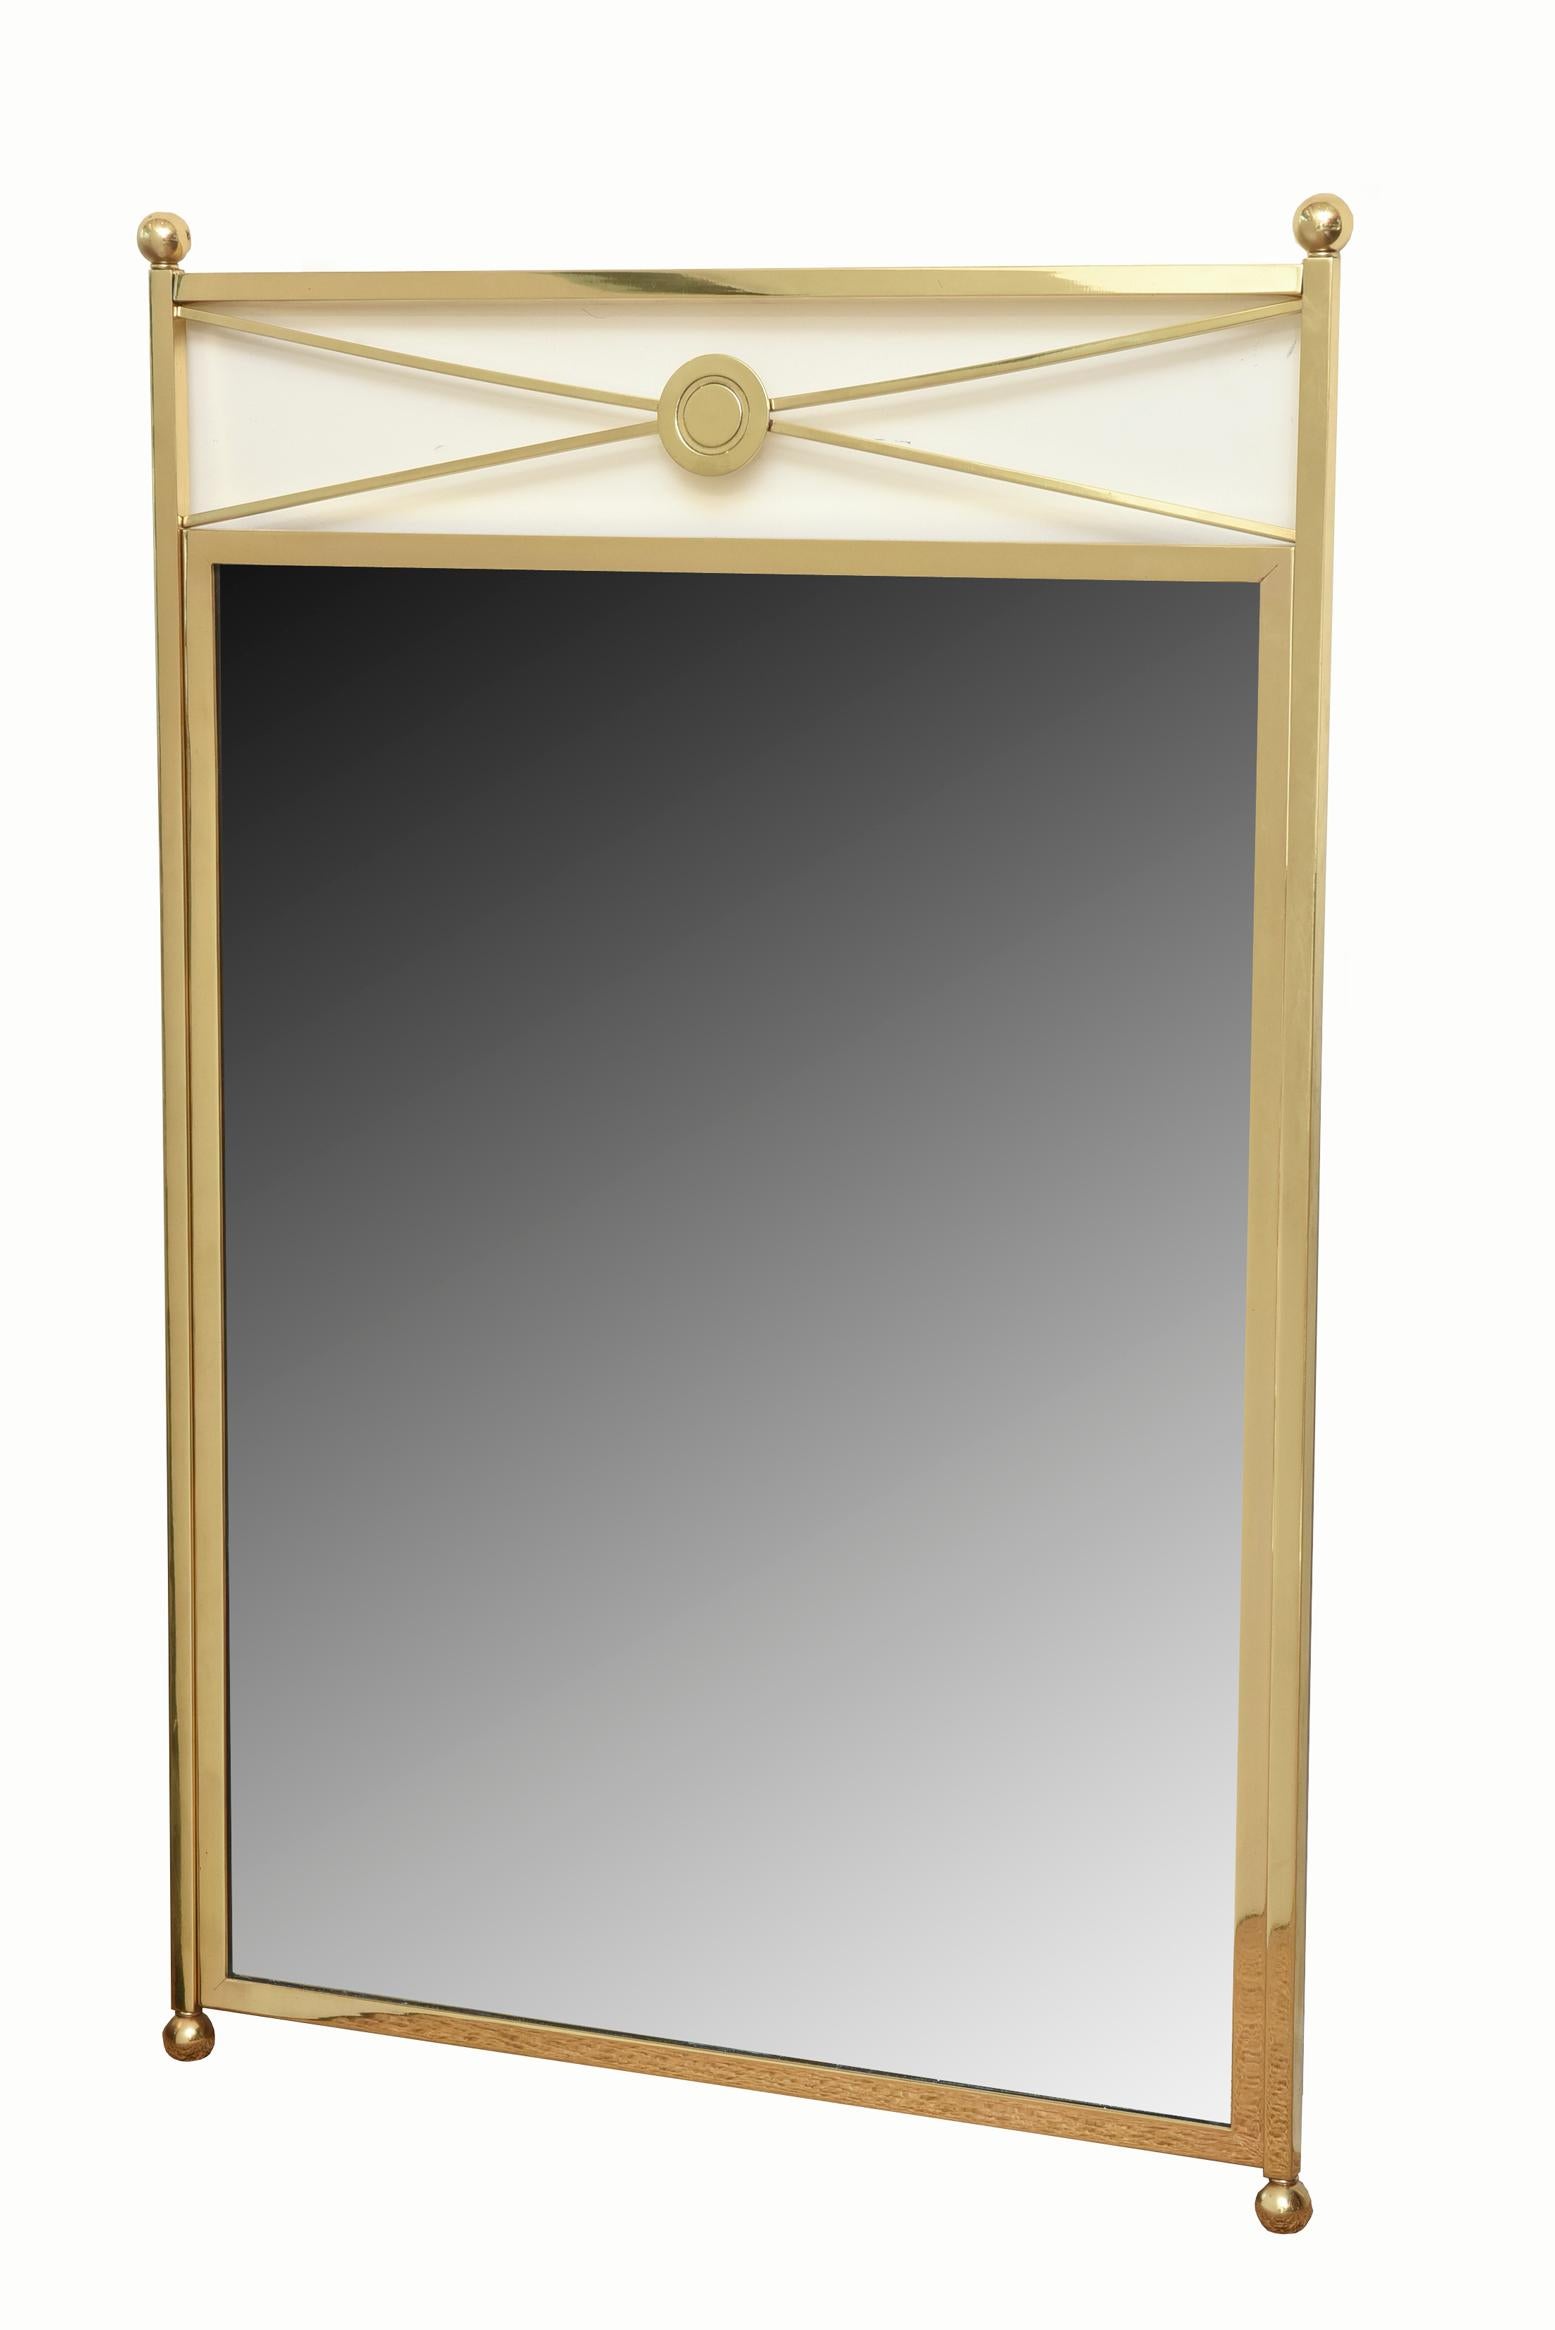 This very modernist designed vintage brass mirror with a French twist and William Billy Haines influence has elegance and simplicity with its ball toppings and crisscross medallion centered top. This is a timeless brass mirror that transcends all